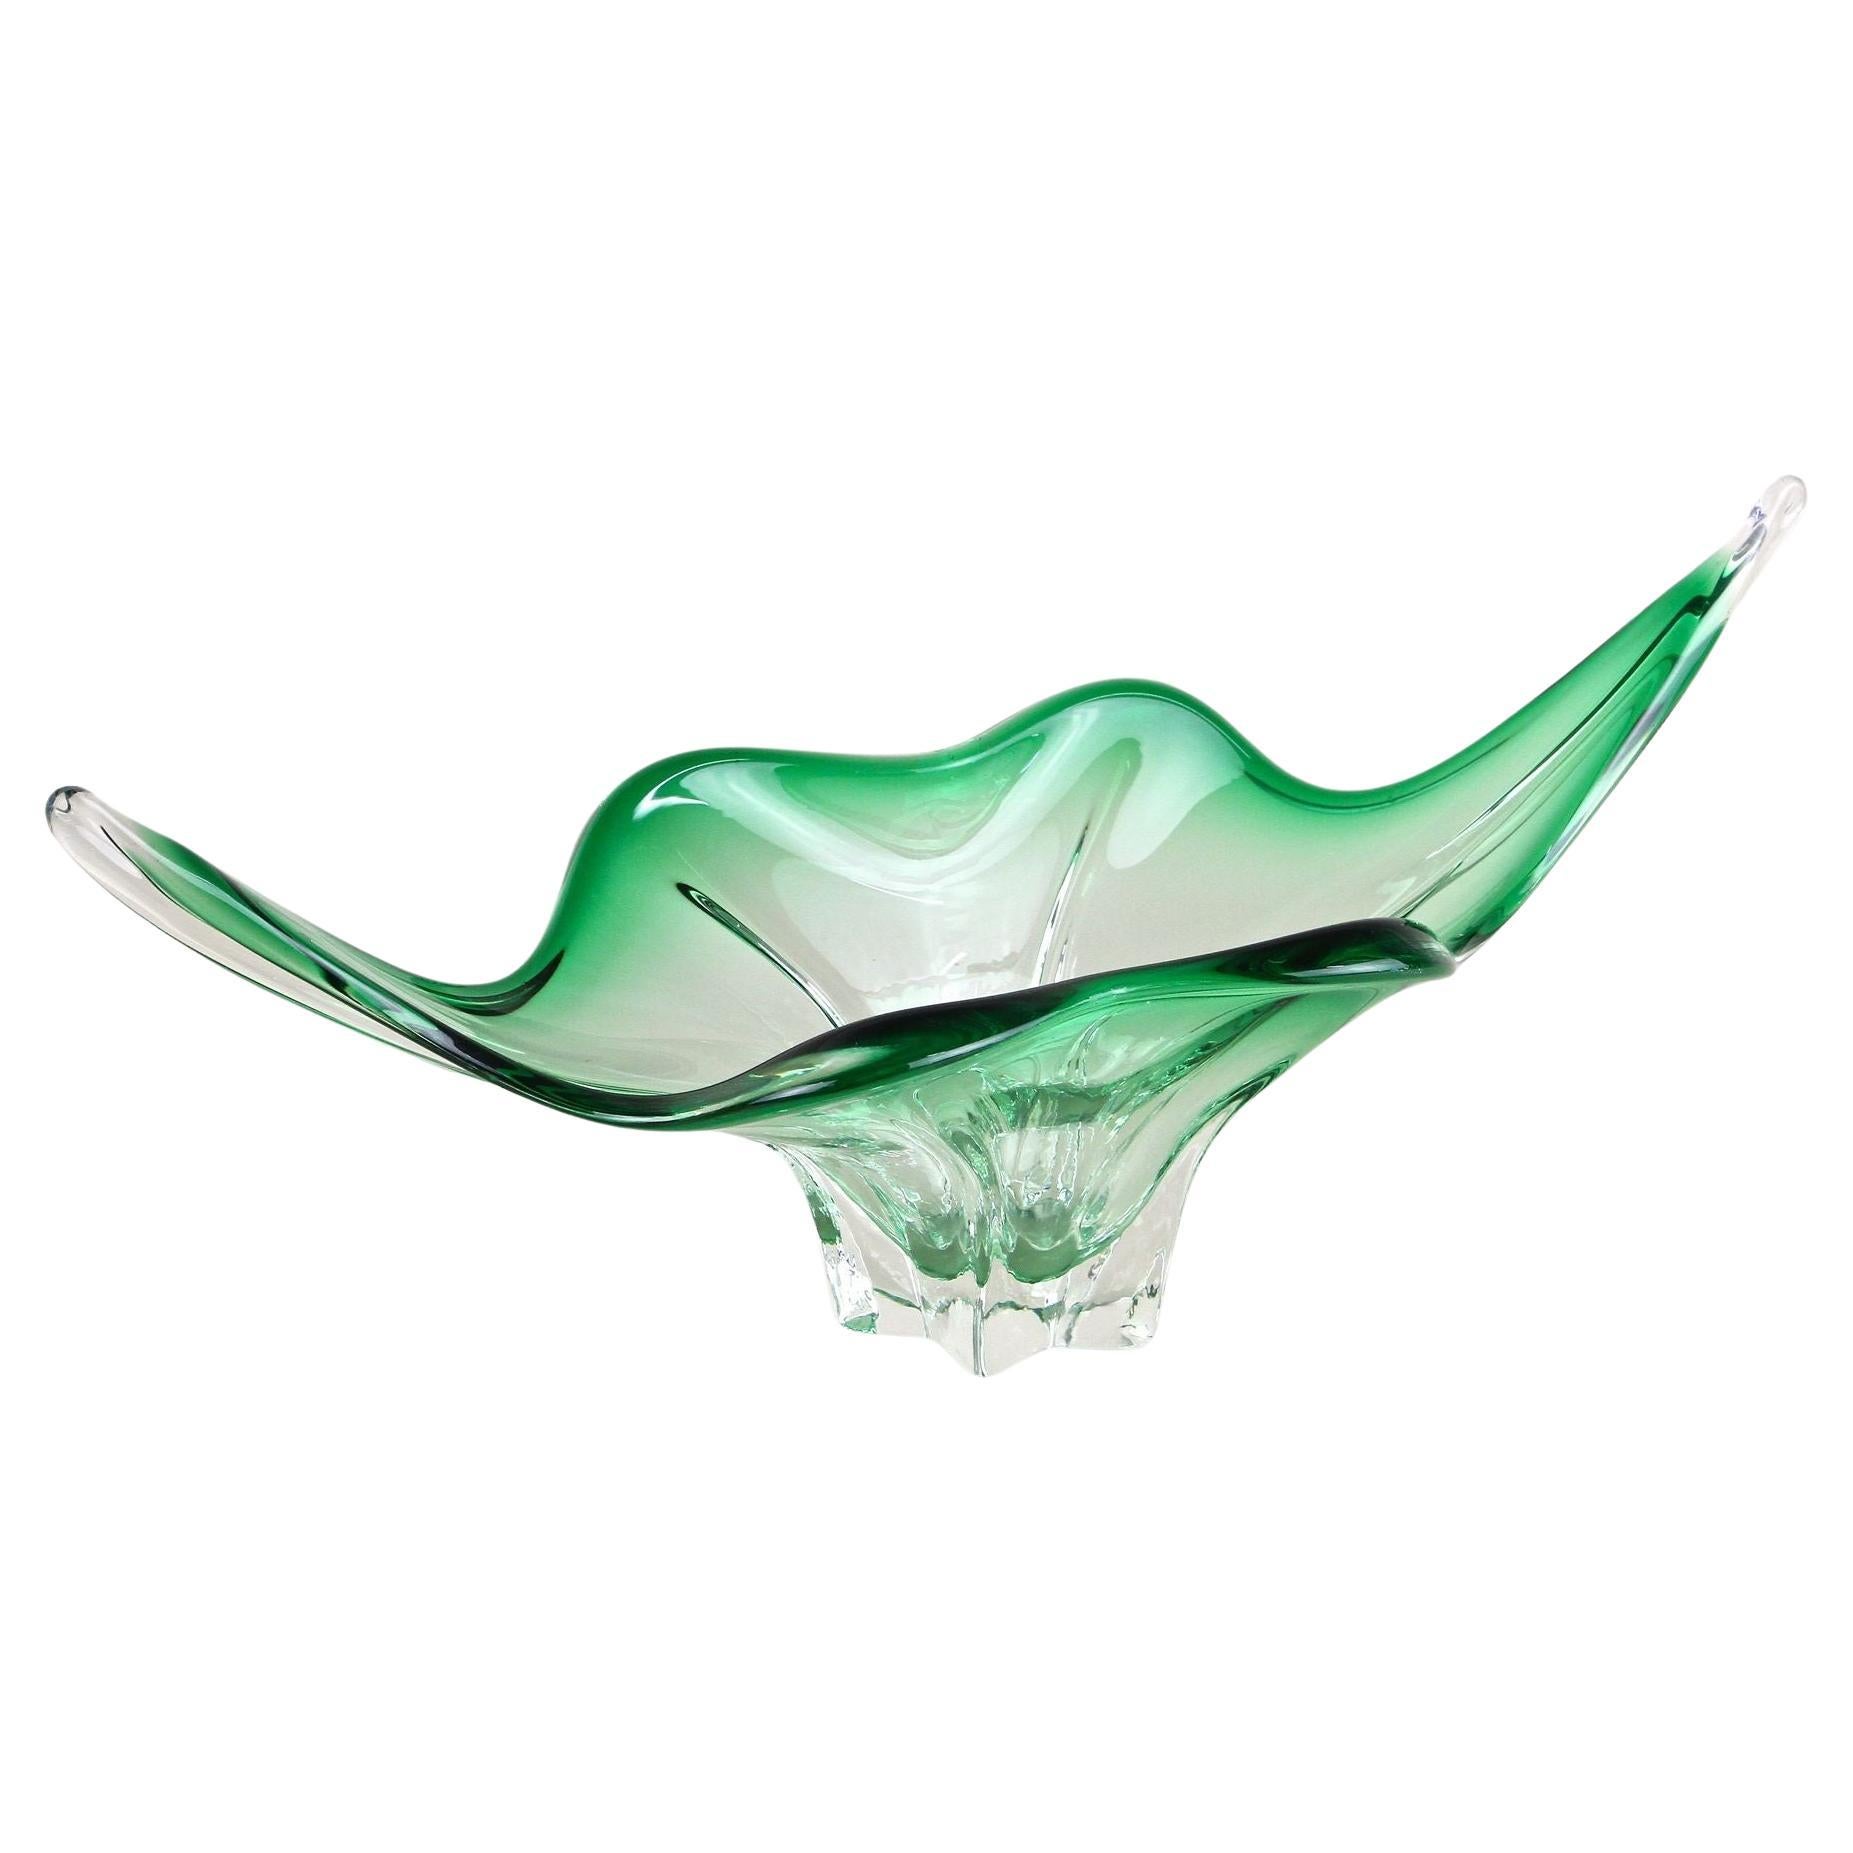 Mid Century Modern Murano Glass Bowl, Green/ Clear Tones - Italy ca. 1960 For Sale